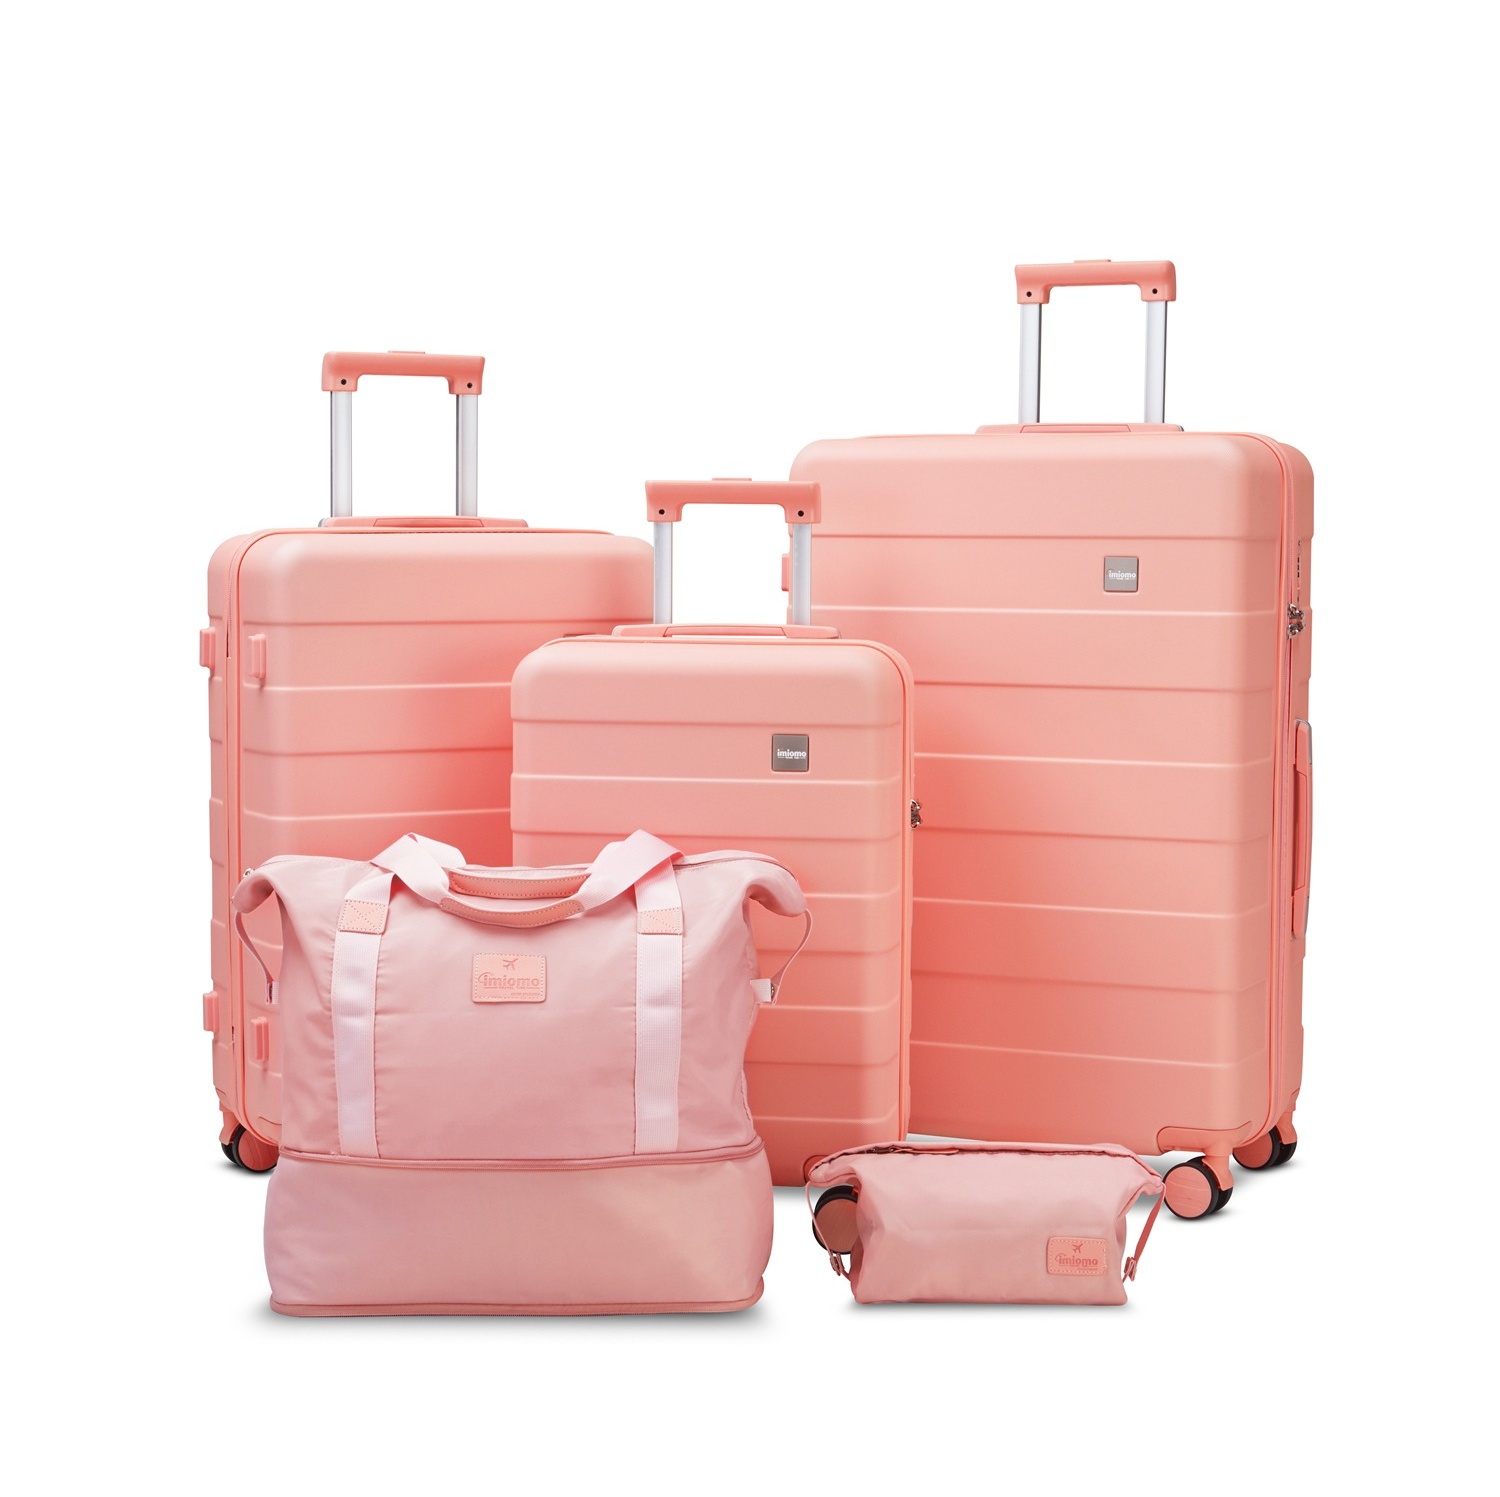 imiomo Carry on Luggage, 20 IN Carry-on Suitcase with Spinner Wheels,  Hardside 3PCS Set Lightweight Rolling Travel Luggage with TSA Lock(20/Pink)